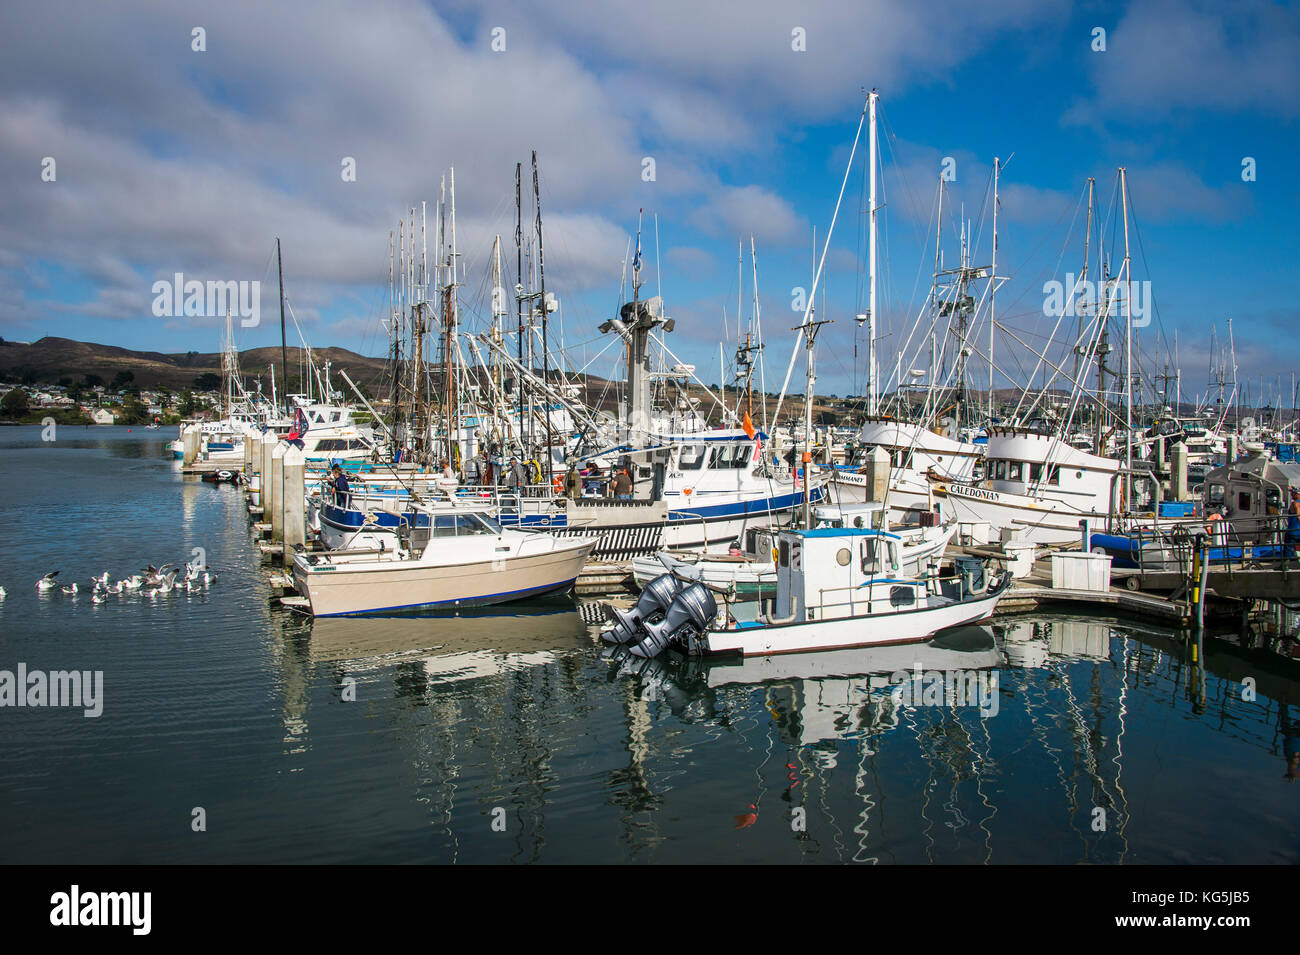 Fishing boats in the harbour of Bodega bay, Northern California, USA Stock Photo